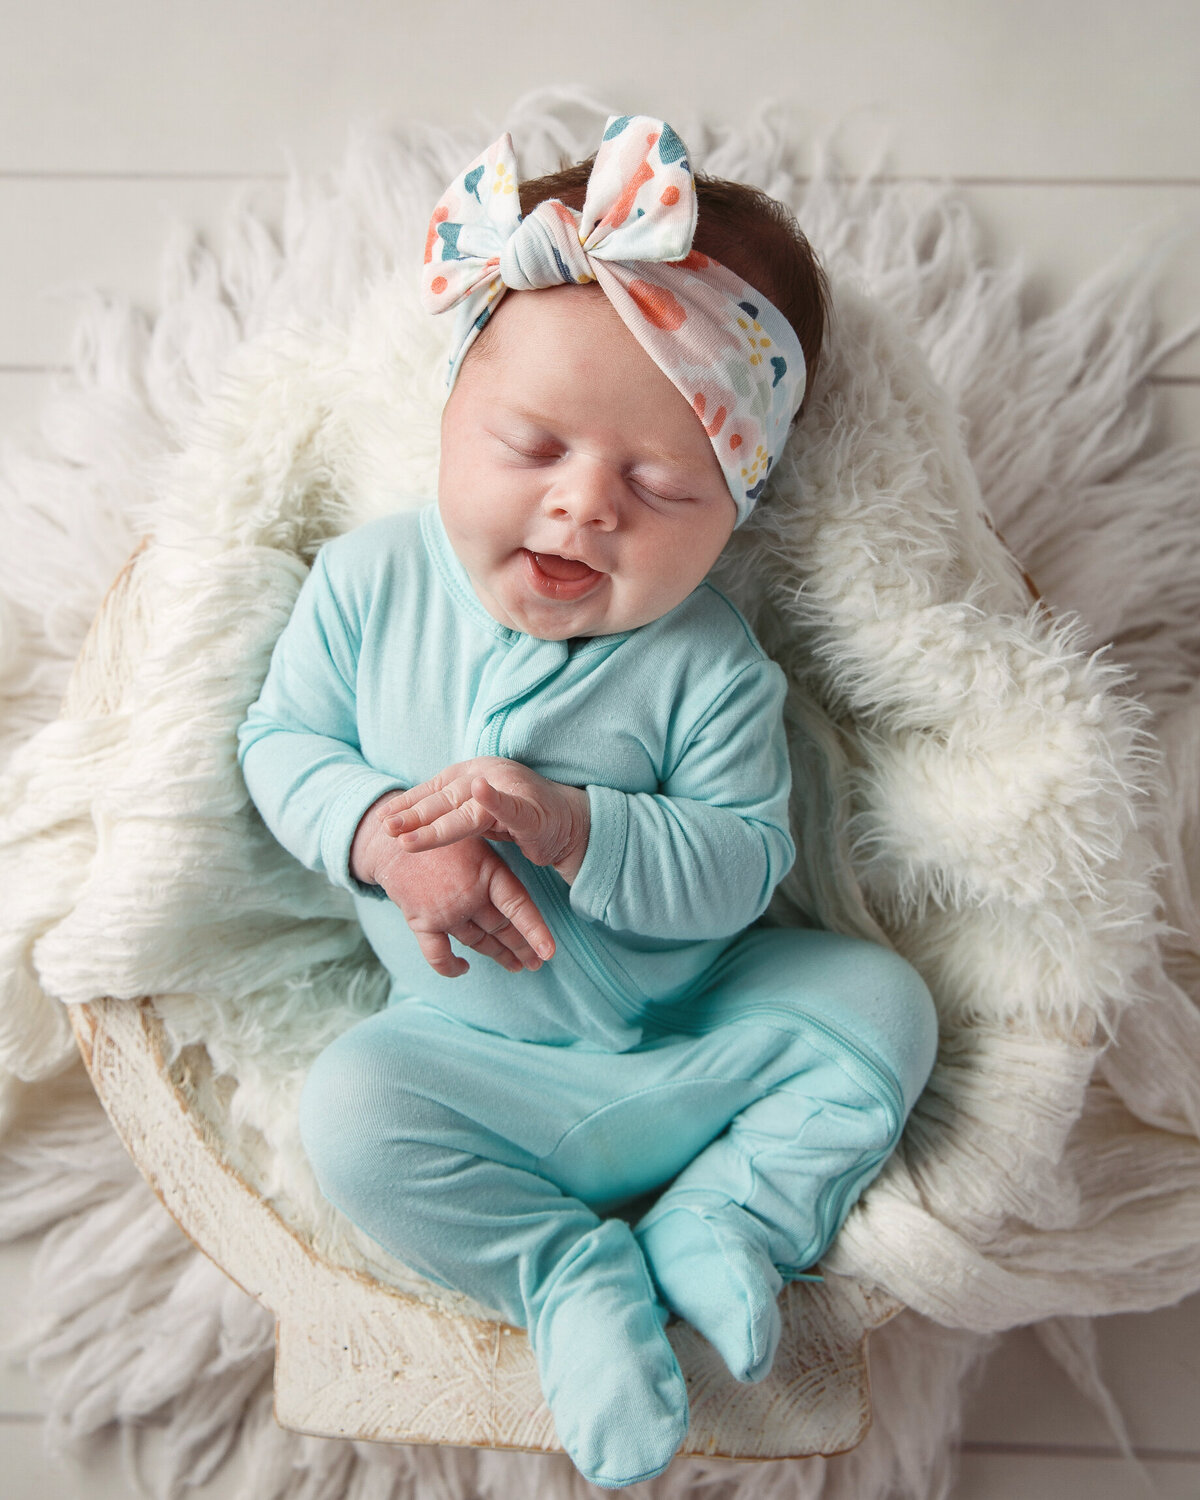 Cute photo of a smiling infant wearing a blue sleeper and a flowered headband